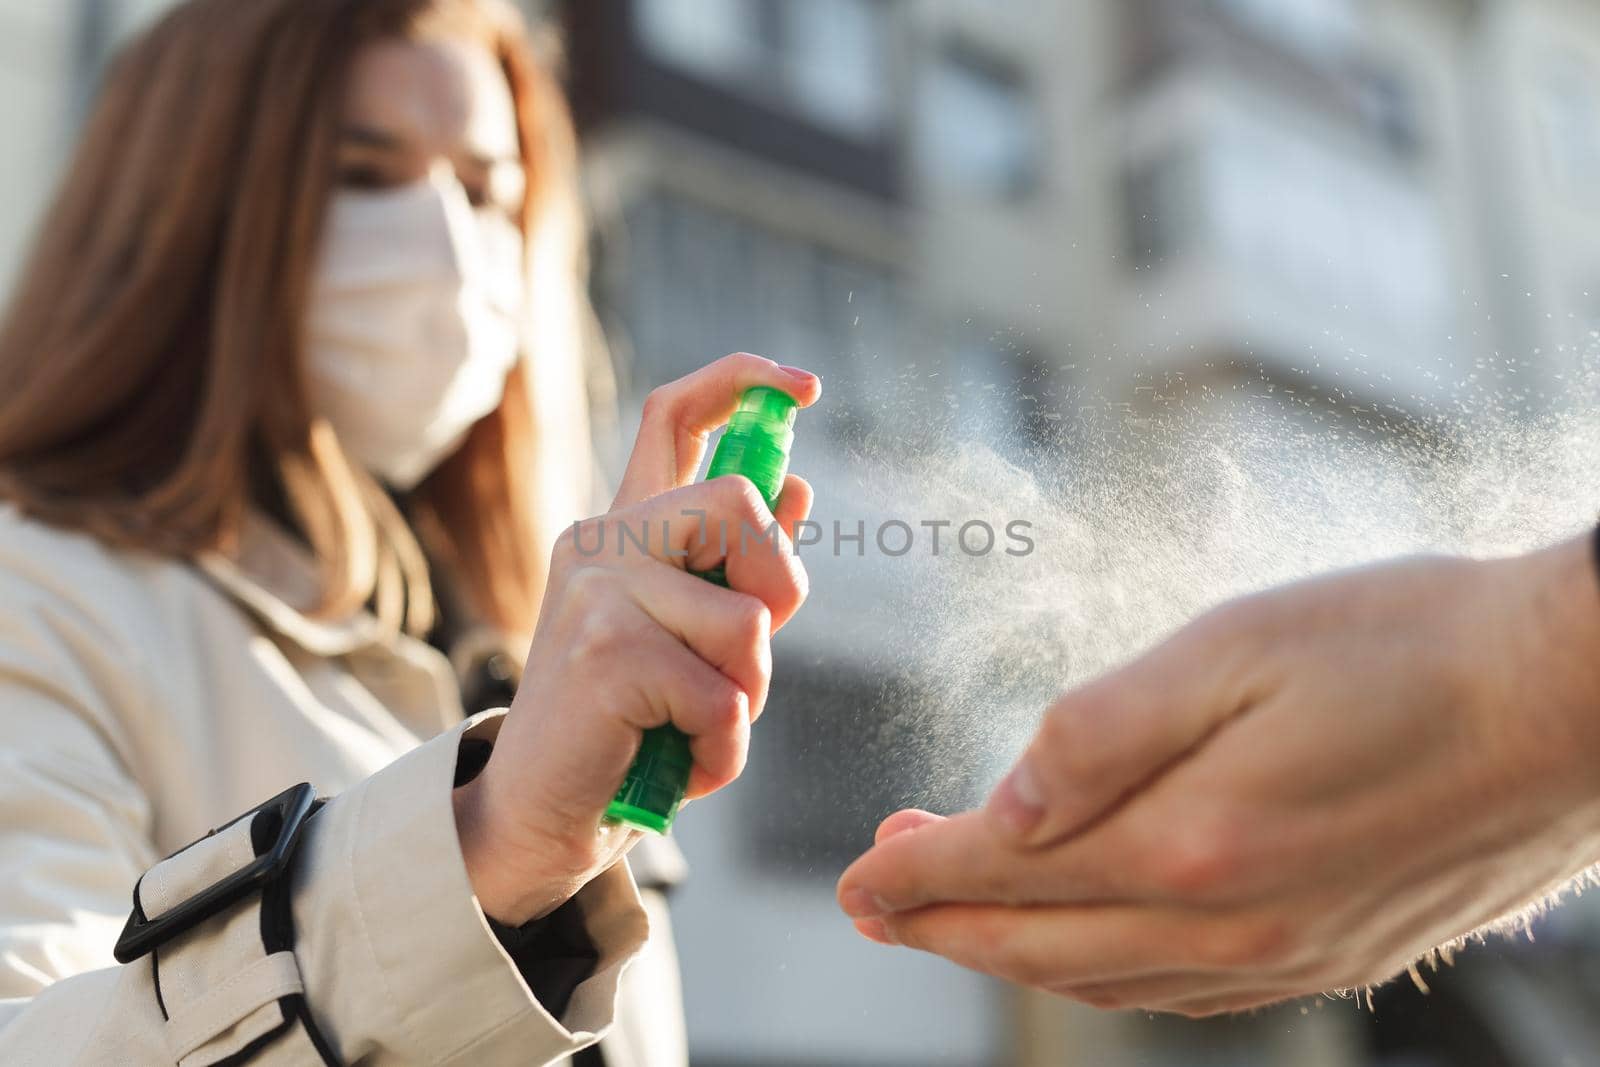 People who use alcohol-based antiseptic gel and wear a preventive mask prevent infection with the Covid-19 coronavirus outbreak, a woman washes a man's hands with hand sanitizer by StudioPeace